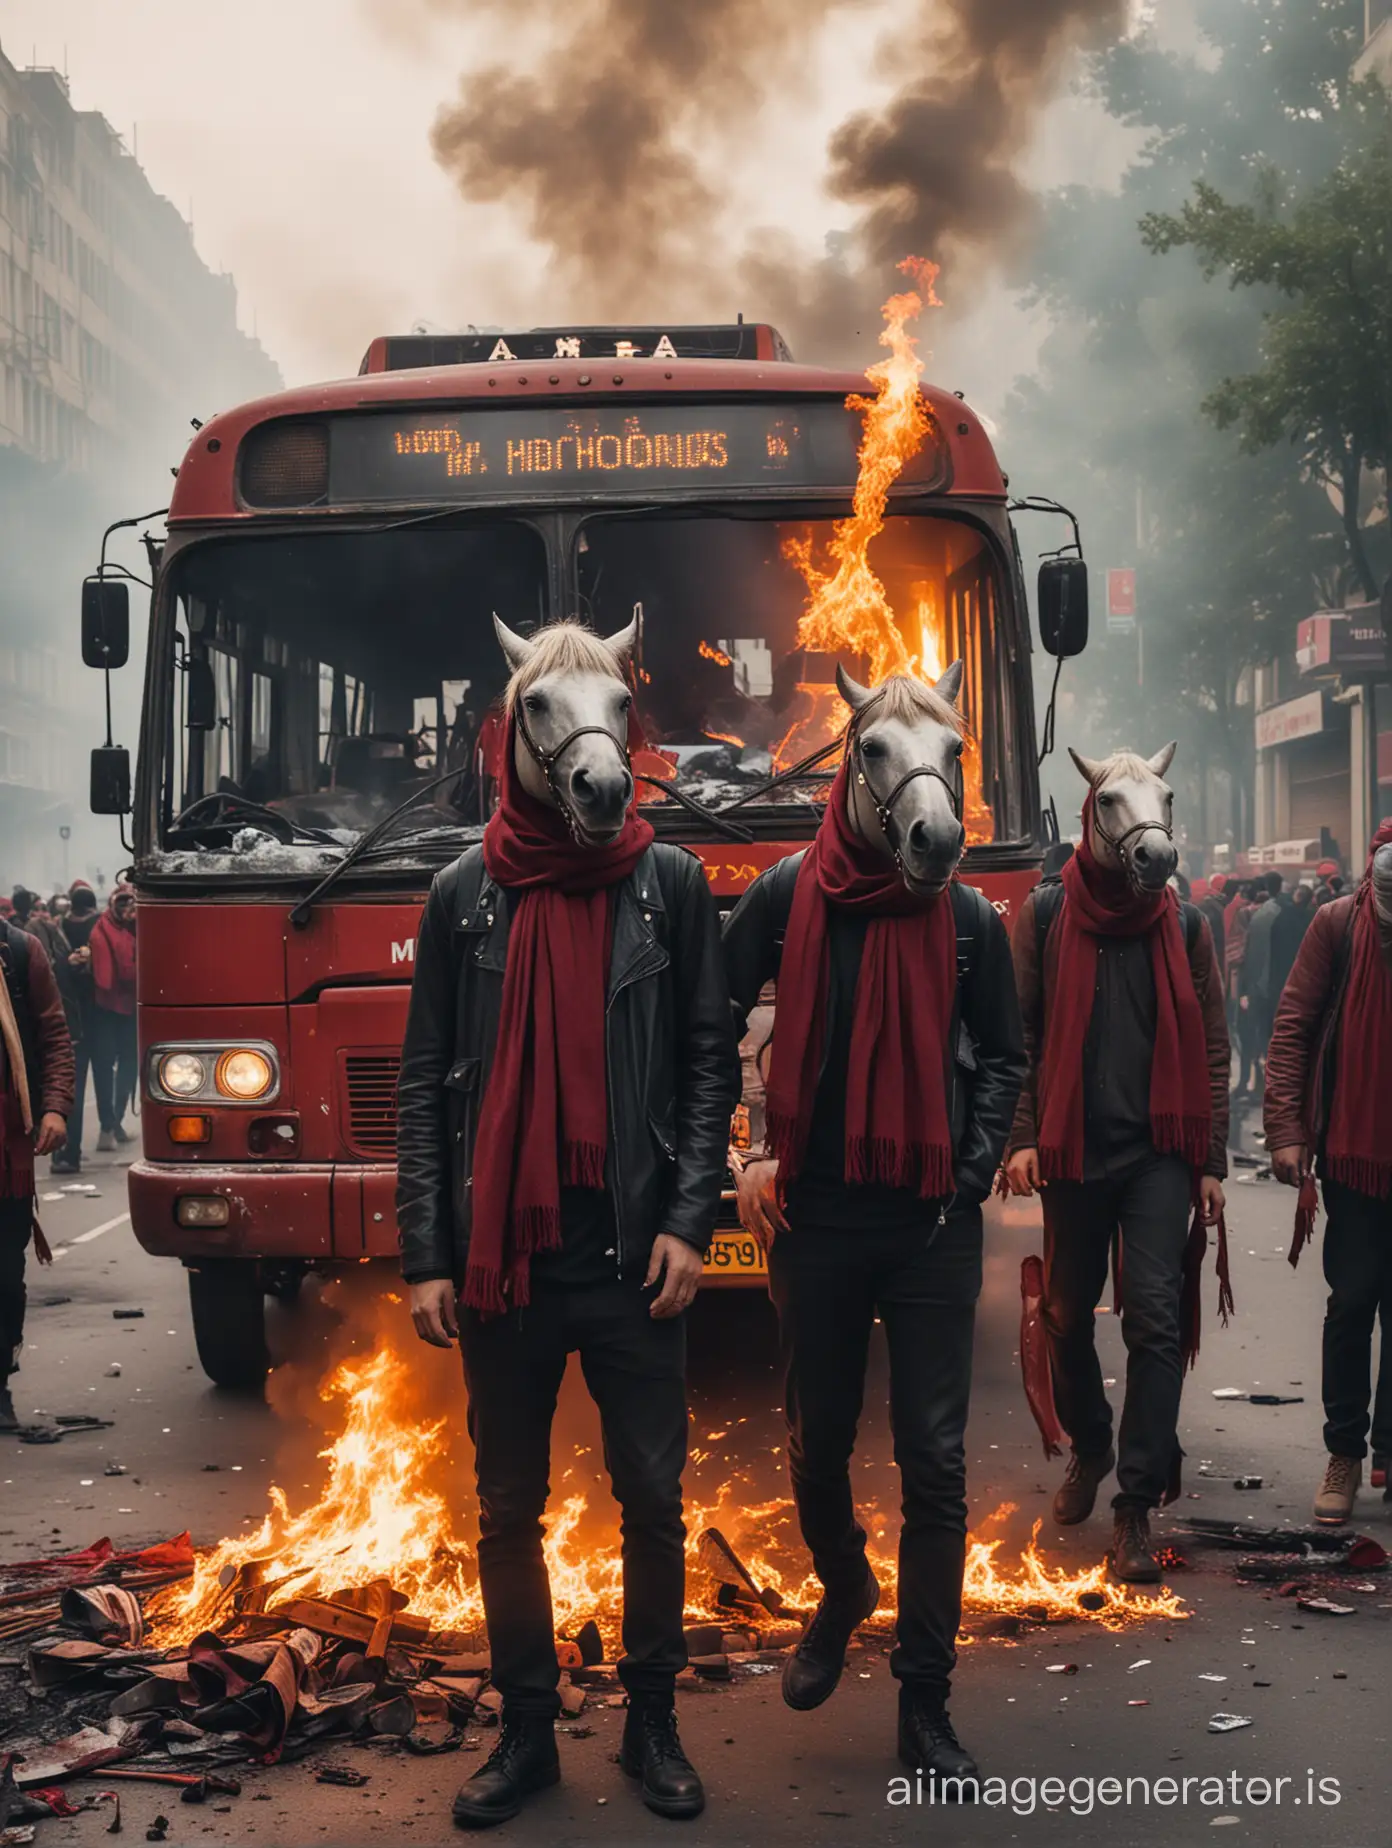 Hooligans with horse heads and maroon scarves on the neck, holding flares outside of a burning maroon bus, at the centre of a burning city